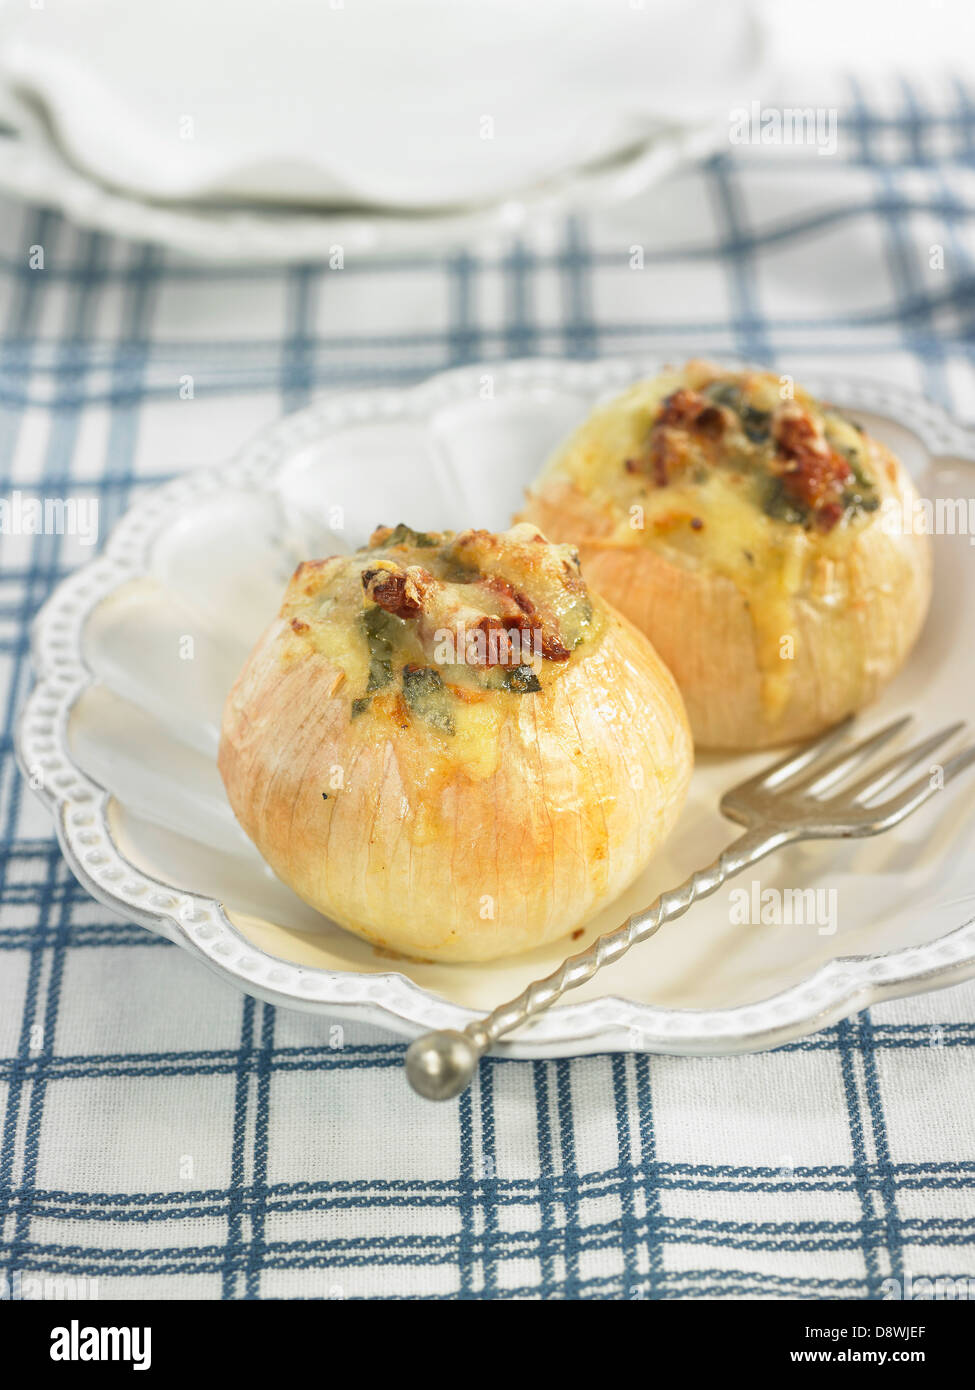 Onions stuffed with emmental,sun-dried tomatoes and spinach Stock Photo